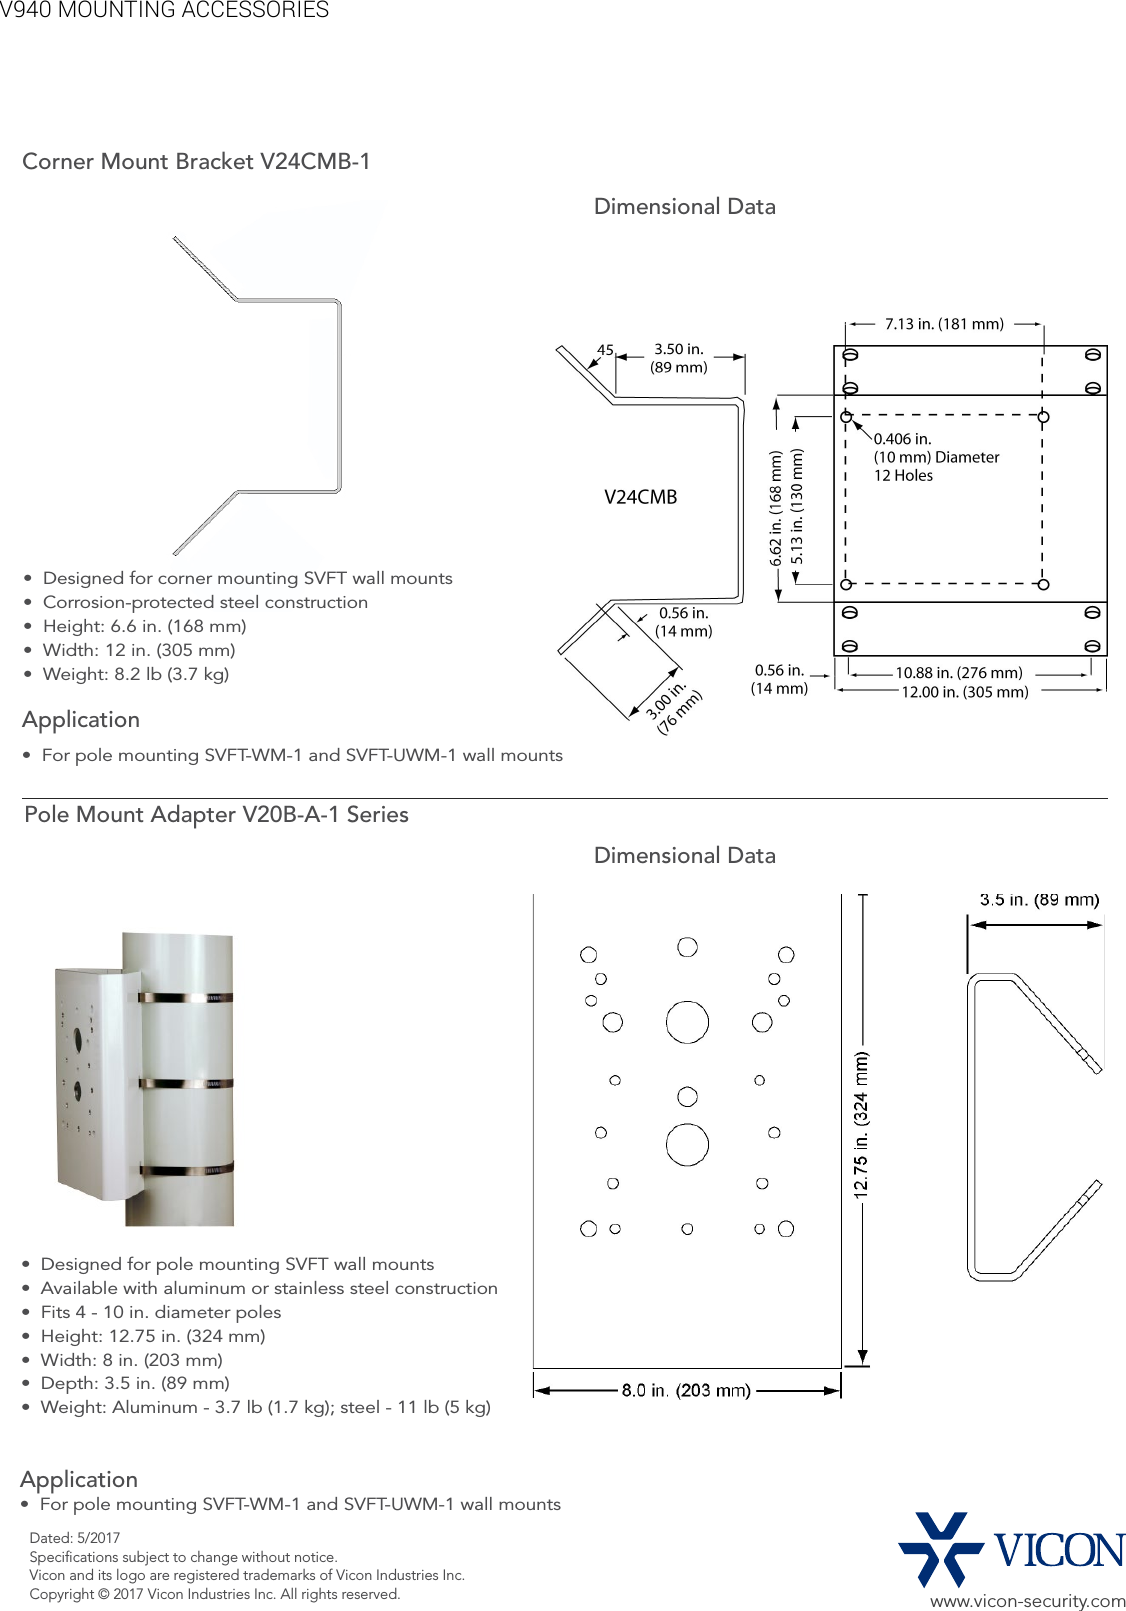 Page 5 of 6 - Security V940 Mountingaccessories User Manual Mounting Accessories